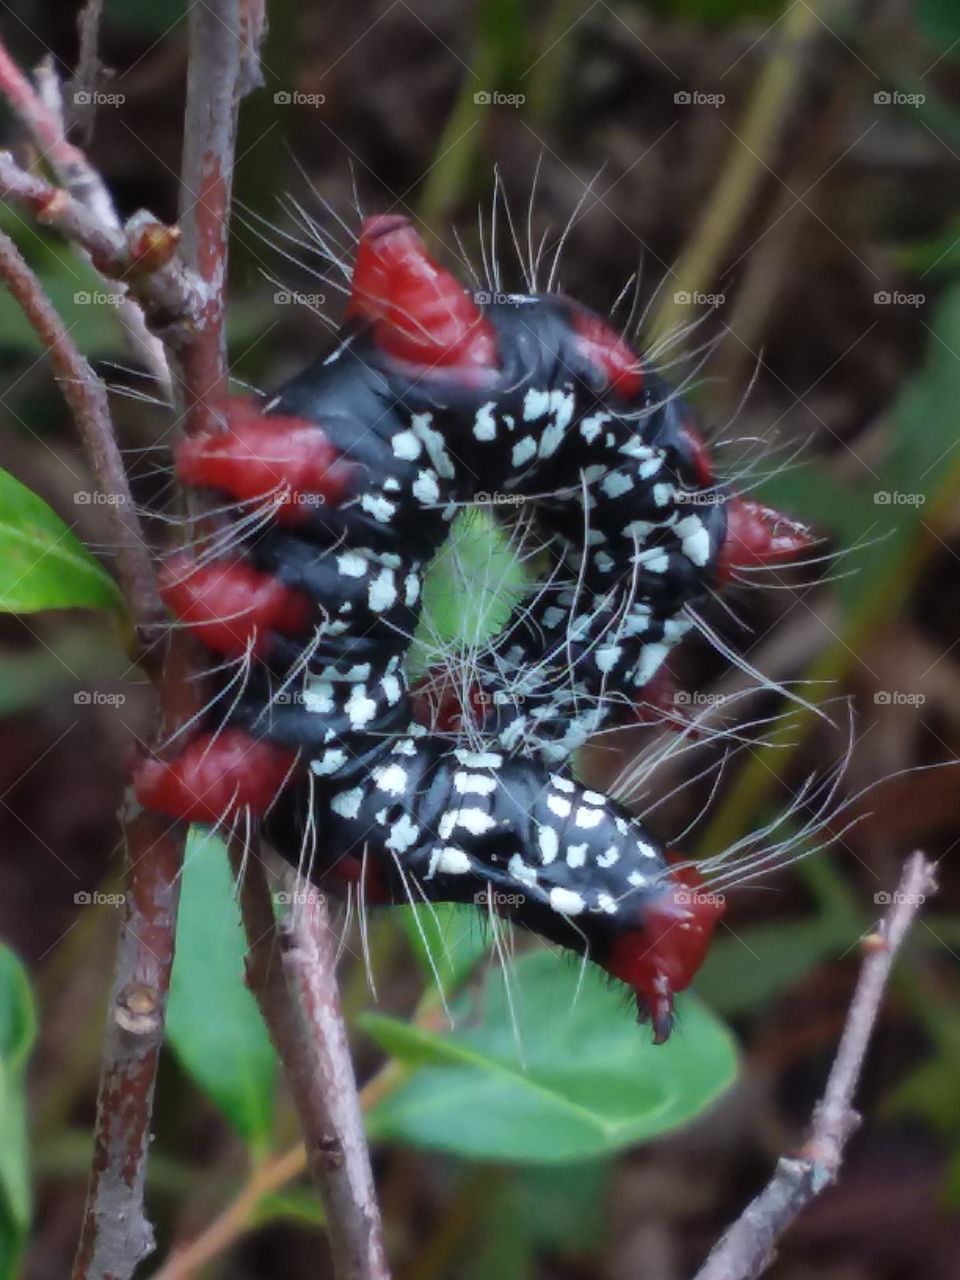 Black, white and red caterpillar